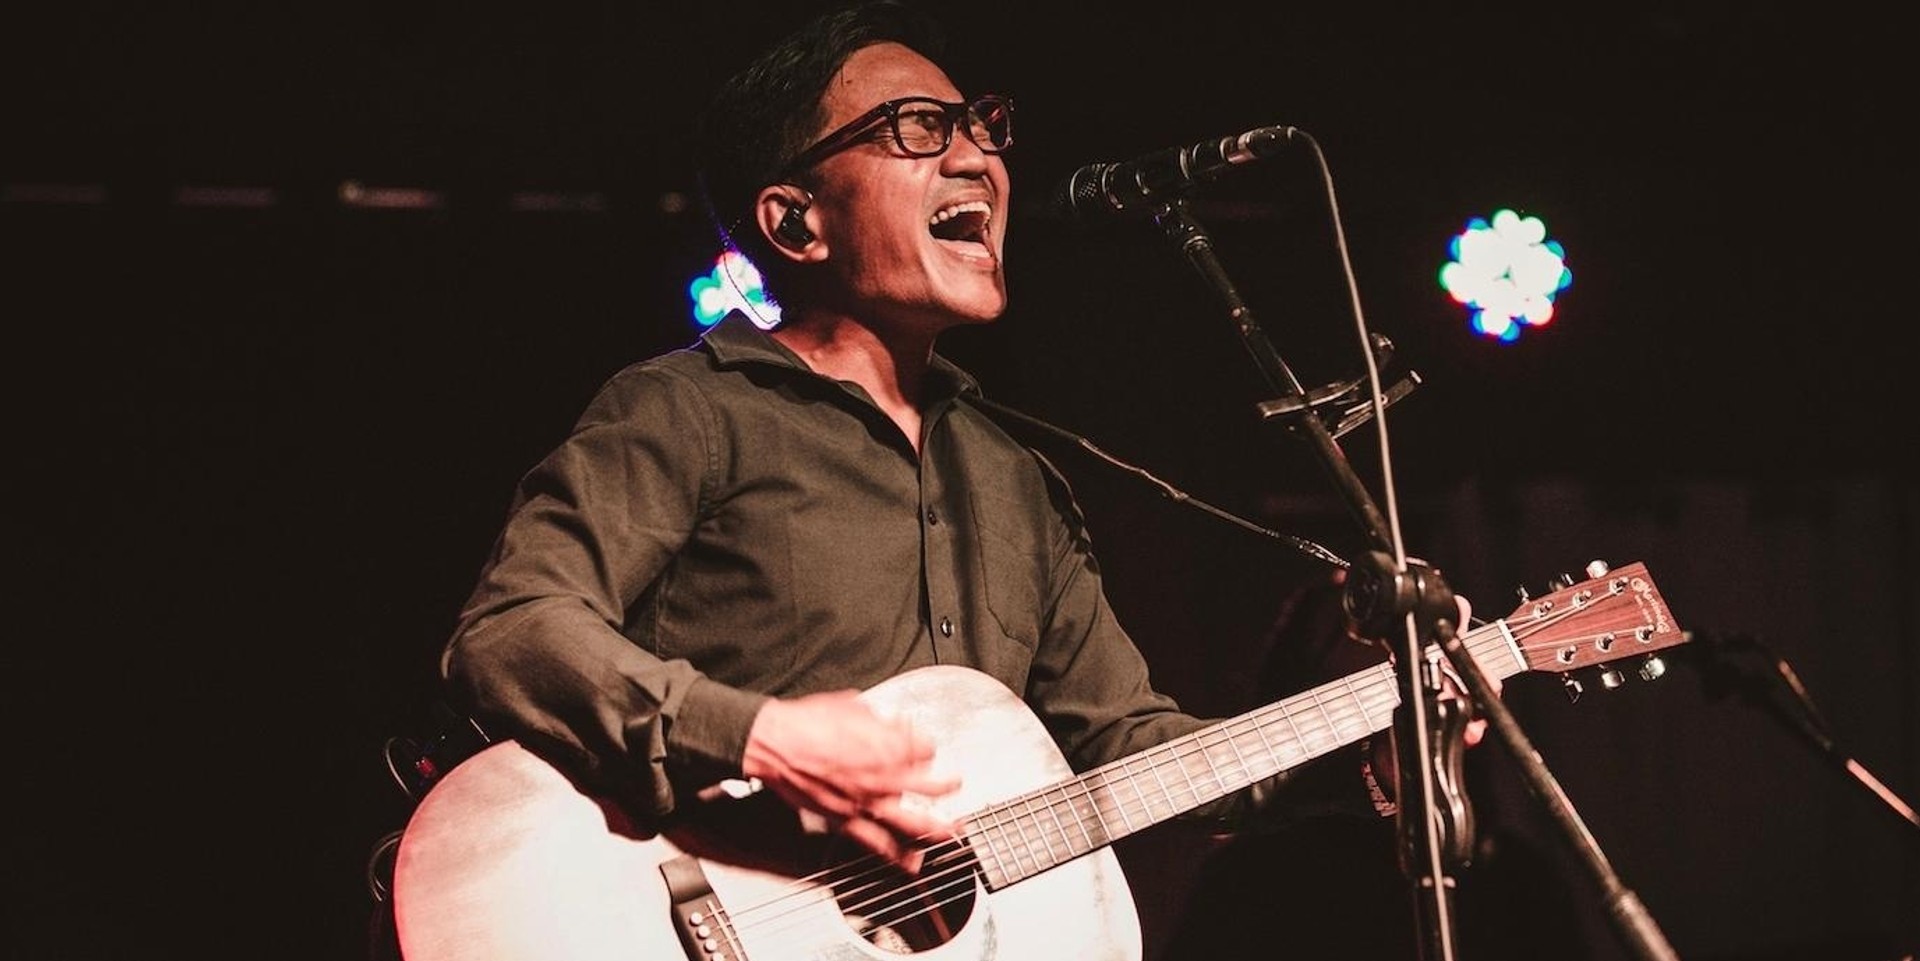 Ebe Dancel's official merch is now available online